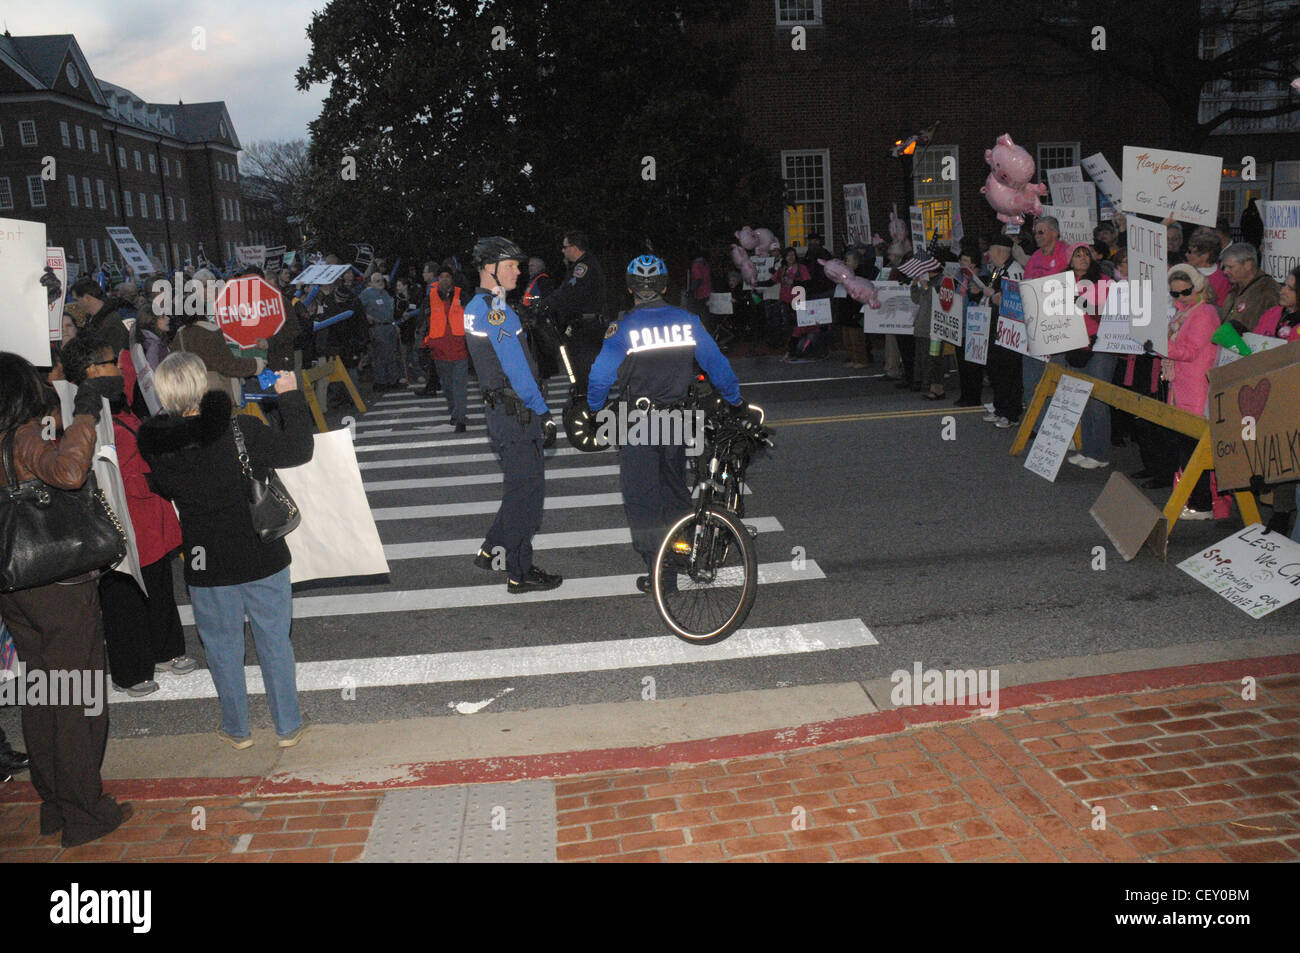 Police keep the pro and anti union demonstrators separated as they taunted each other in Annapolis, Maryland Stock Photo